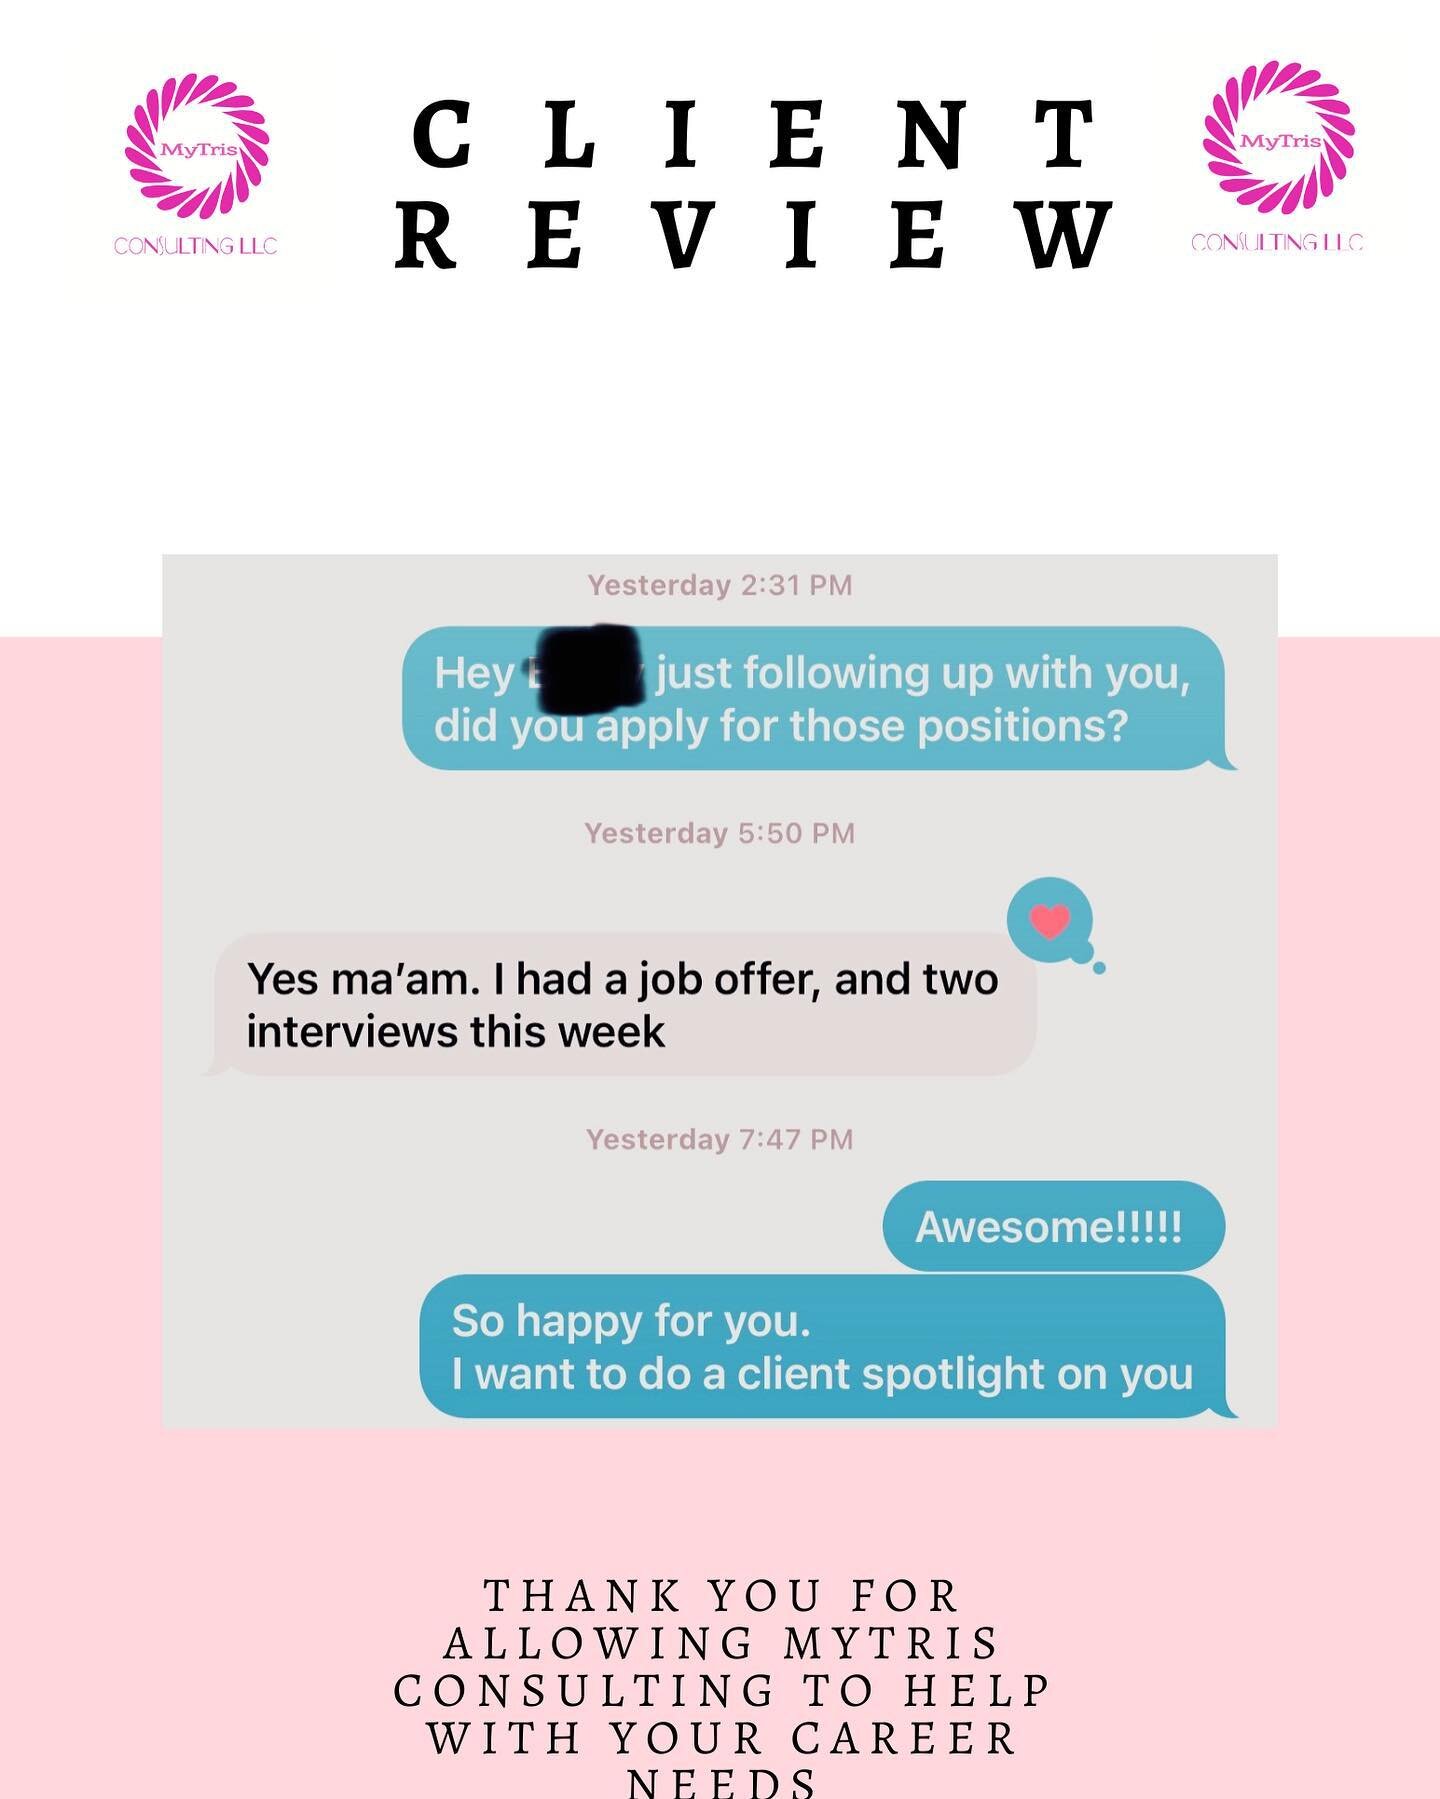 Tuesday&rsquo;s are for client reviews, testimonies, and feedback!

🚨CLIENT SPOTLIGHT LOADING🚨

It&rsquo;s an honor for me to offer quality service to my clients, swipe for a before and after resume revamp 😉

Happy Tuesday guys!

P.S. Don&rsquo;t 